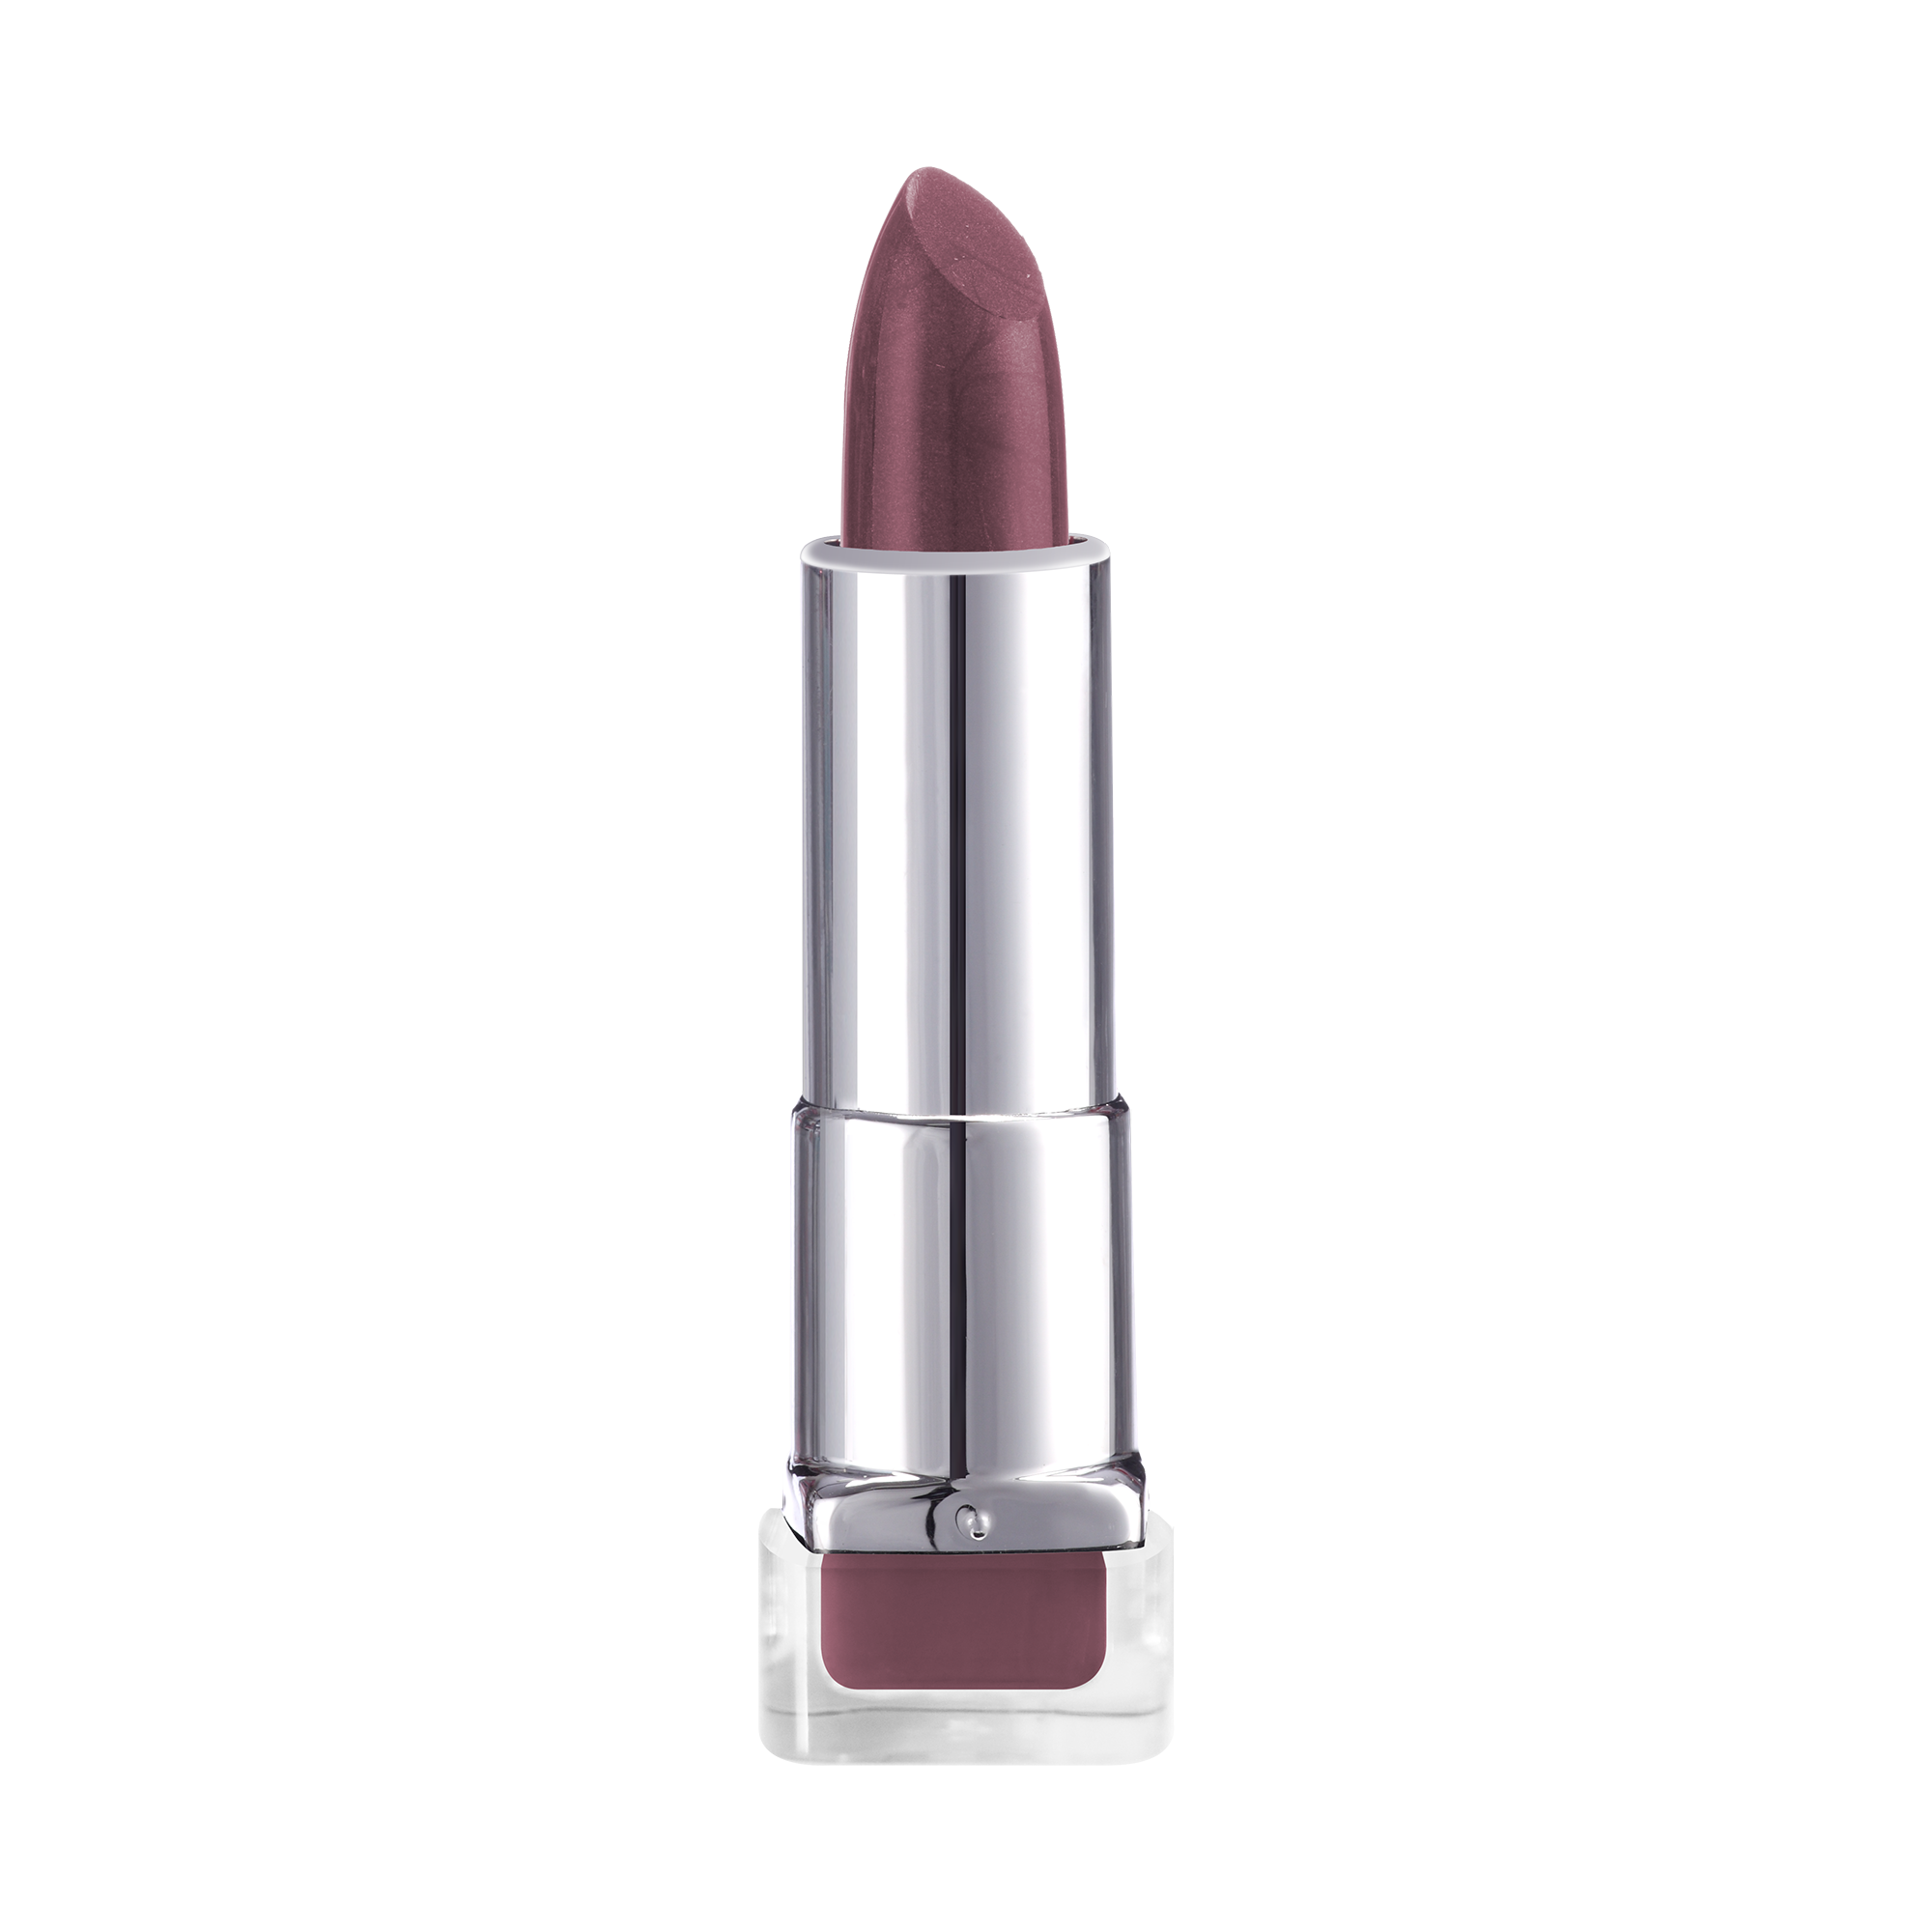 Lipstick - Going Taupe-Less